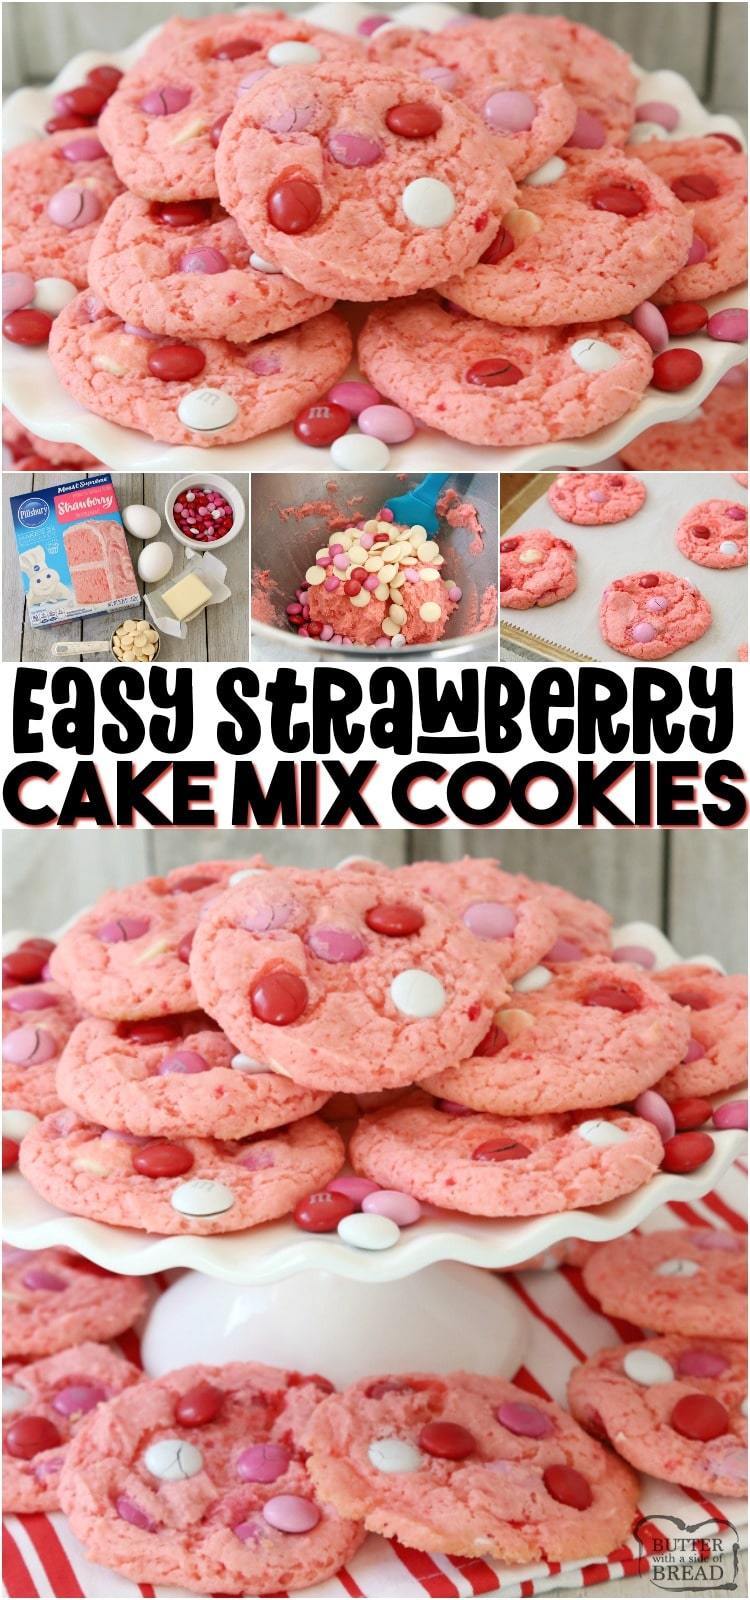 Strawberry Cake Mix Cookies are a soft & sweet cookie made with just 4 simple ingredients! It’s easy to make these flavorful and festive cake mix cookies.